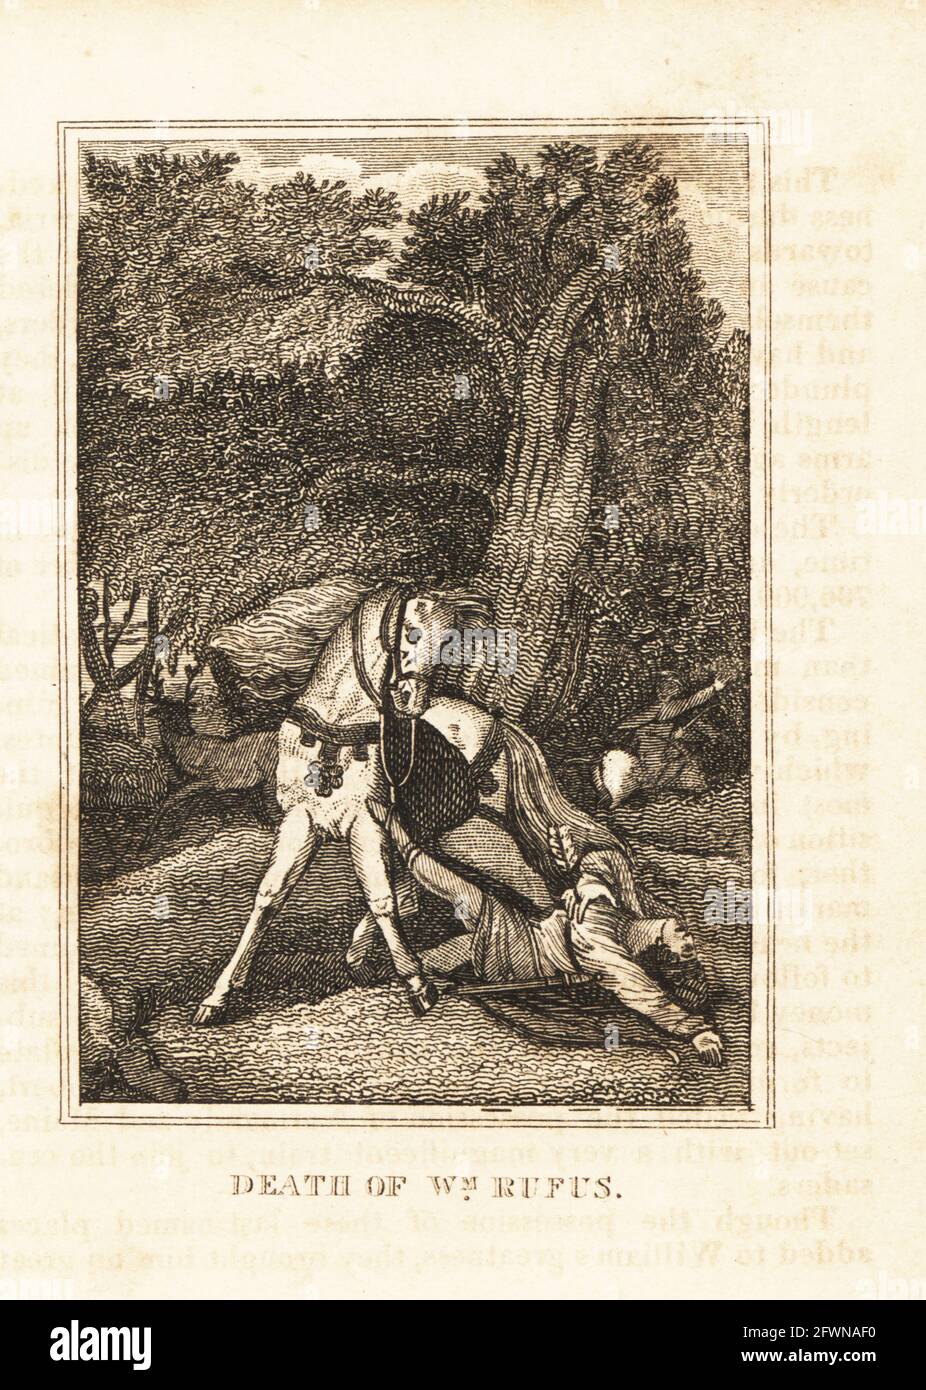 King William II of England killed by an arrow to the chest shot by one of his own men, Walter Tirel, while stag hunting in the New Forest, 1100. Death of William Rufus. Copperplate engraving from M. A. Jones’ History of England from Julius Caesar to George IV, G. Virtue, 26 Ivy Lane, London, 1836. Stock Photo